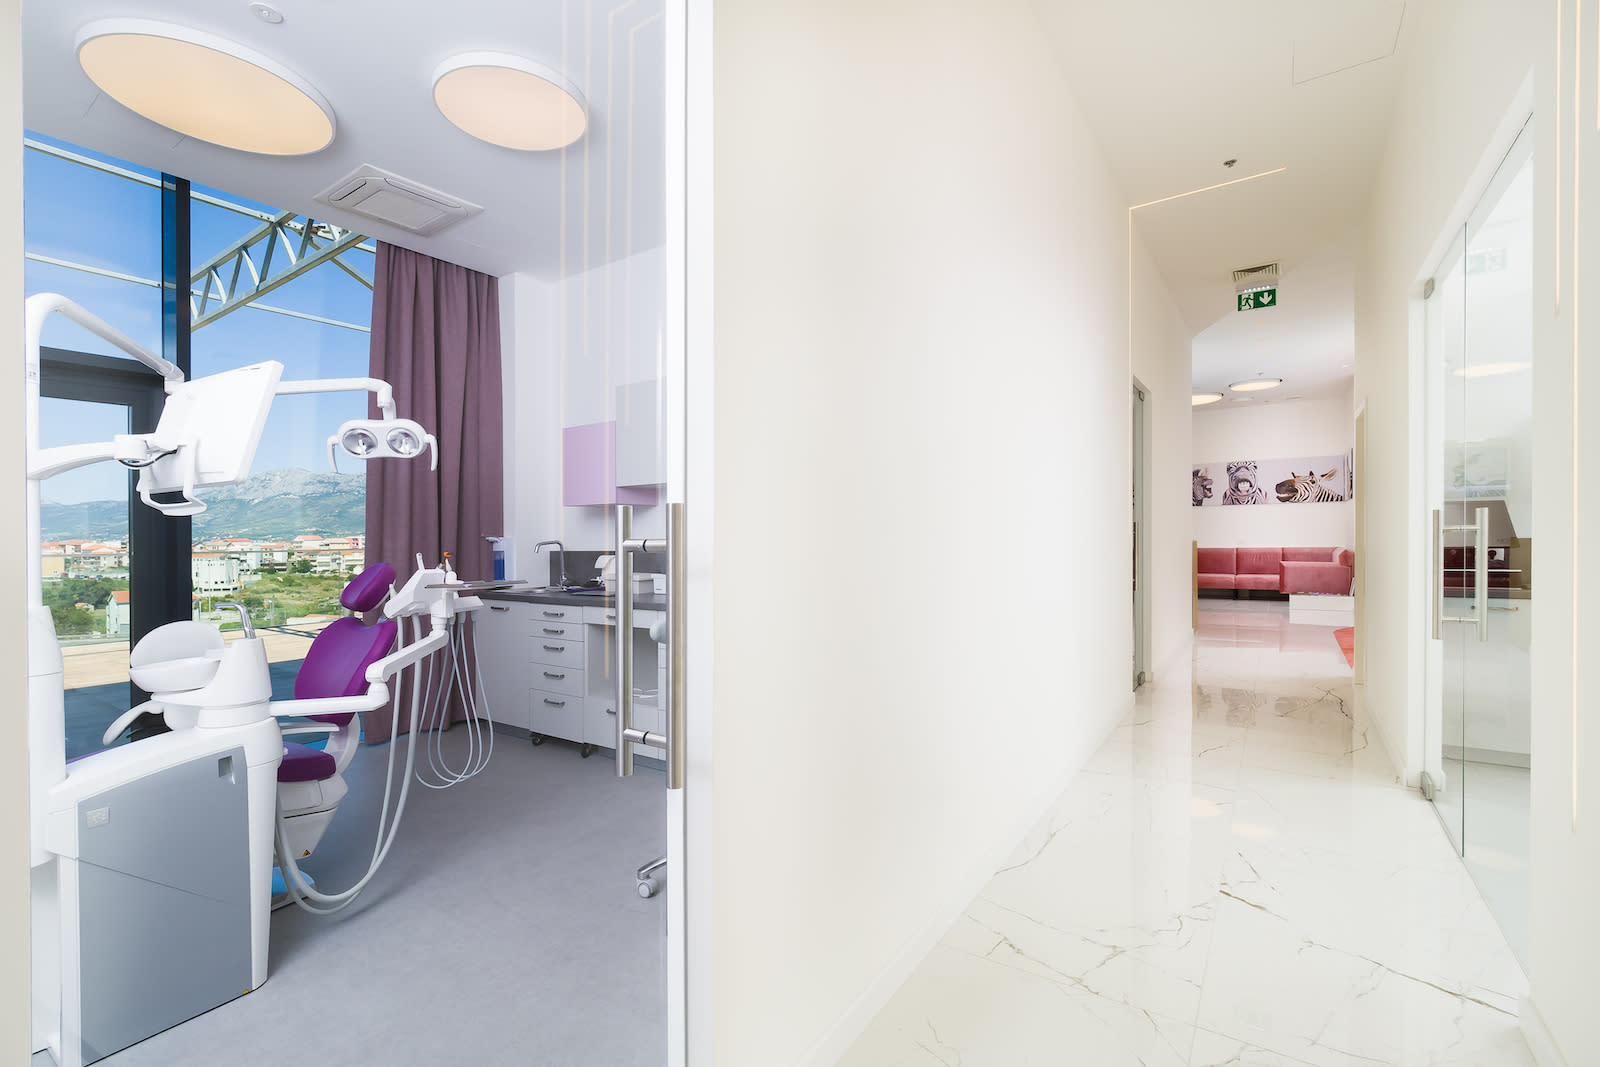 The modern and spacious interior of the Dentelli Dental Clinic.